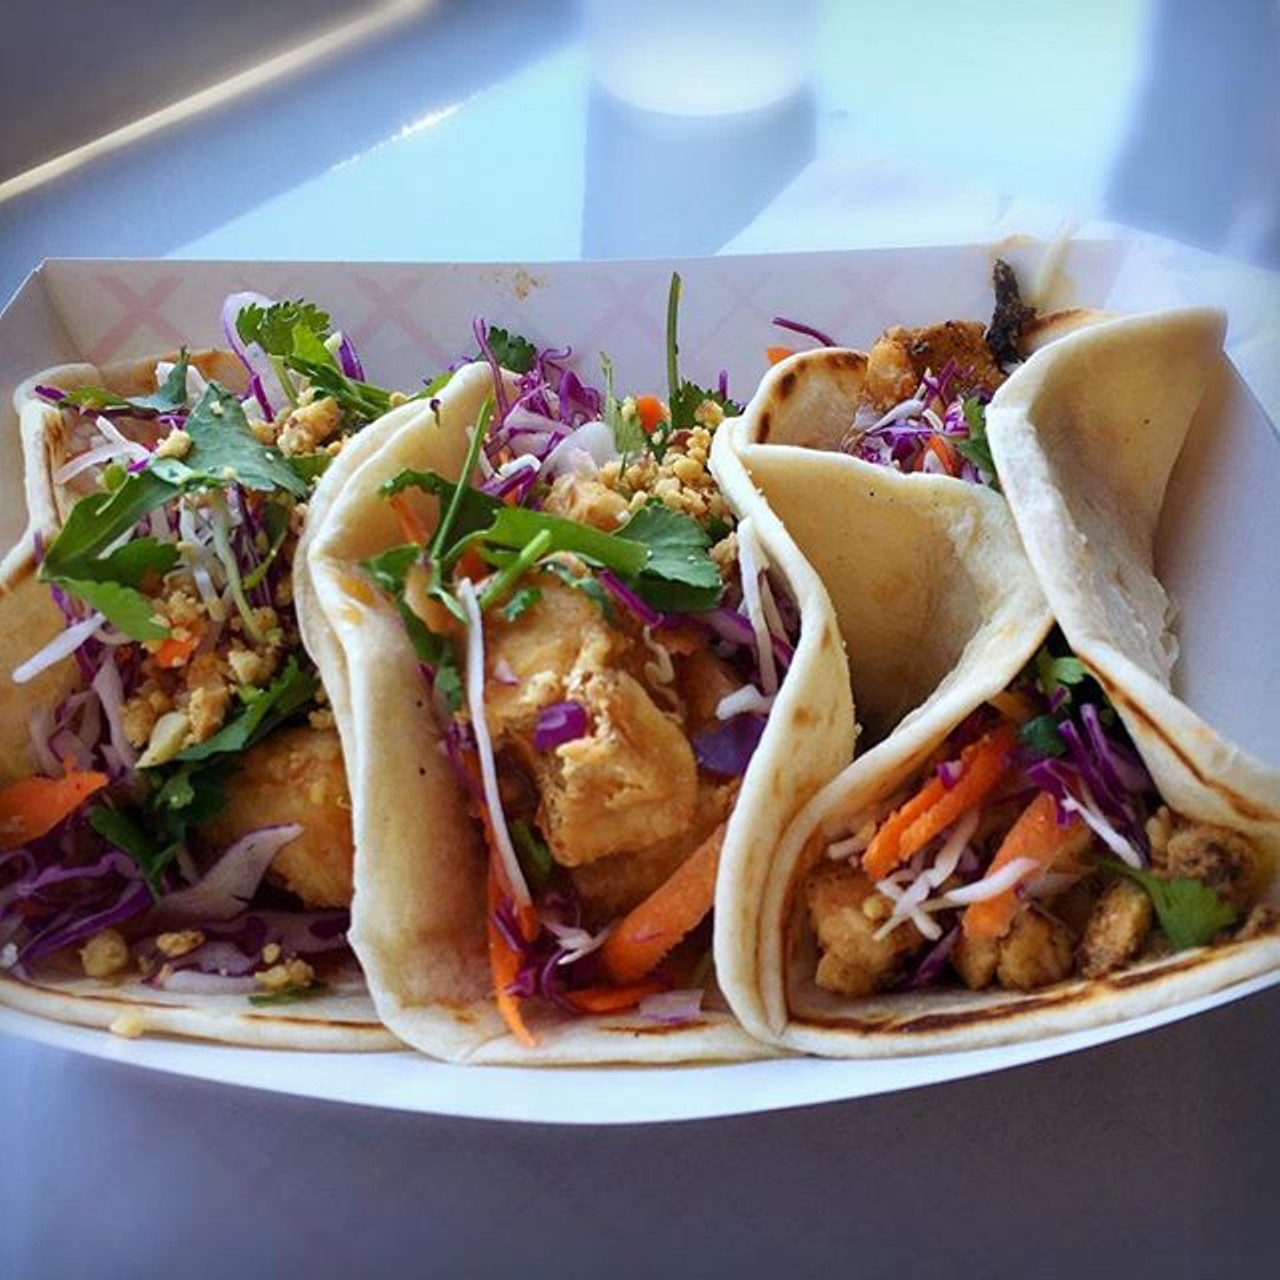 Thai Peanut Chicken taco from Tako Cheena
932 N. MIlls Ave.
The Thai peanut chicken crushes it (literally). The chicken house taco with a hint of sweetness comes with crushed peanuts and mixed cabbage, cilantro and scallion.
Photo via jeffus3/Instagram